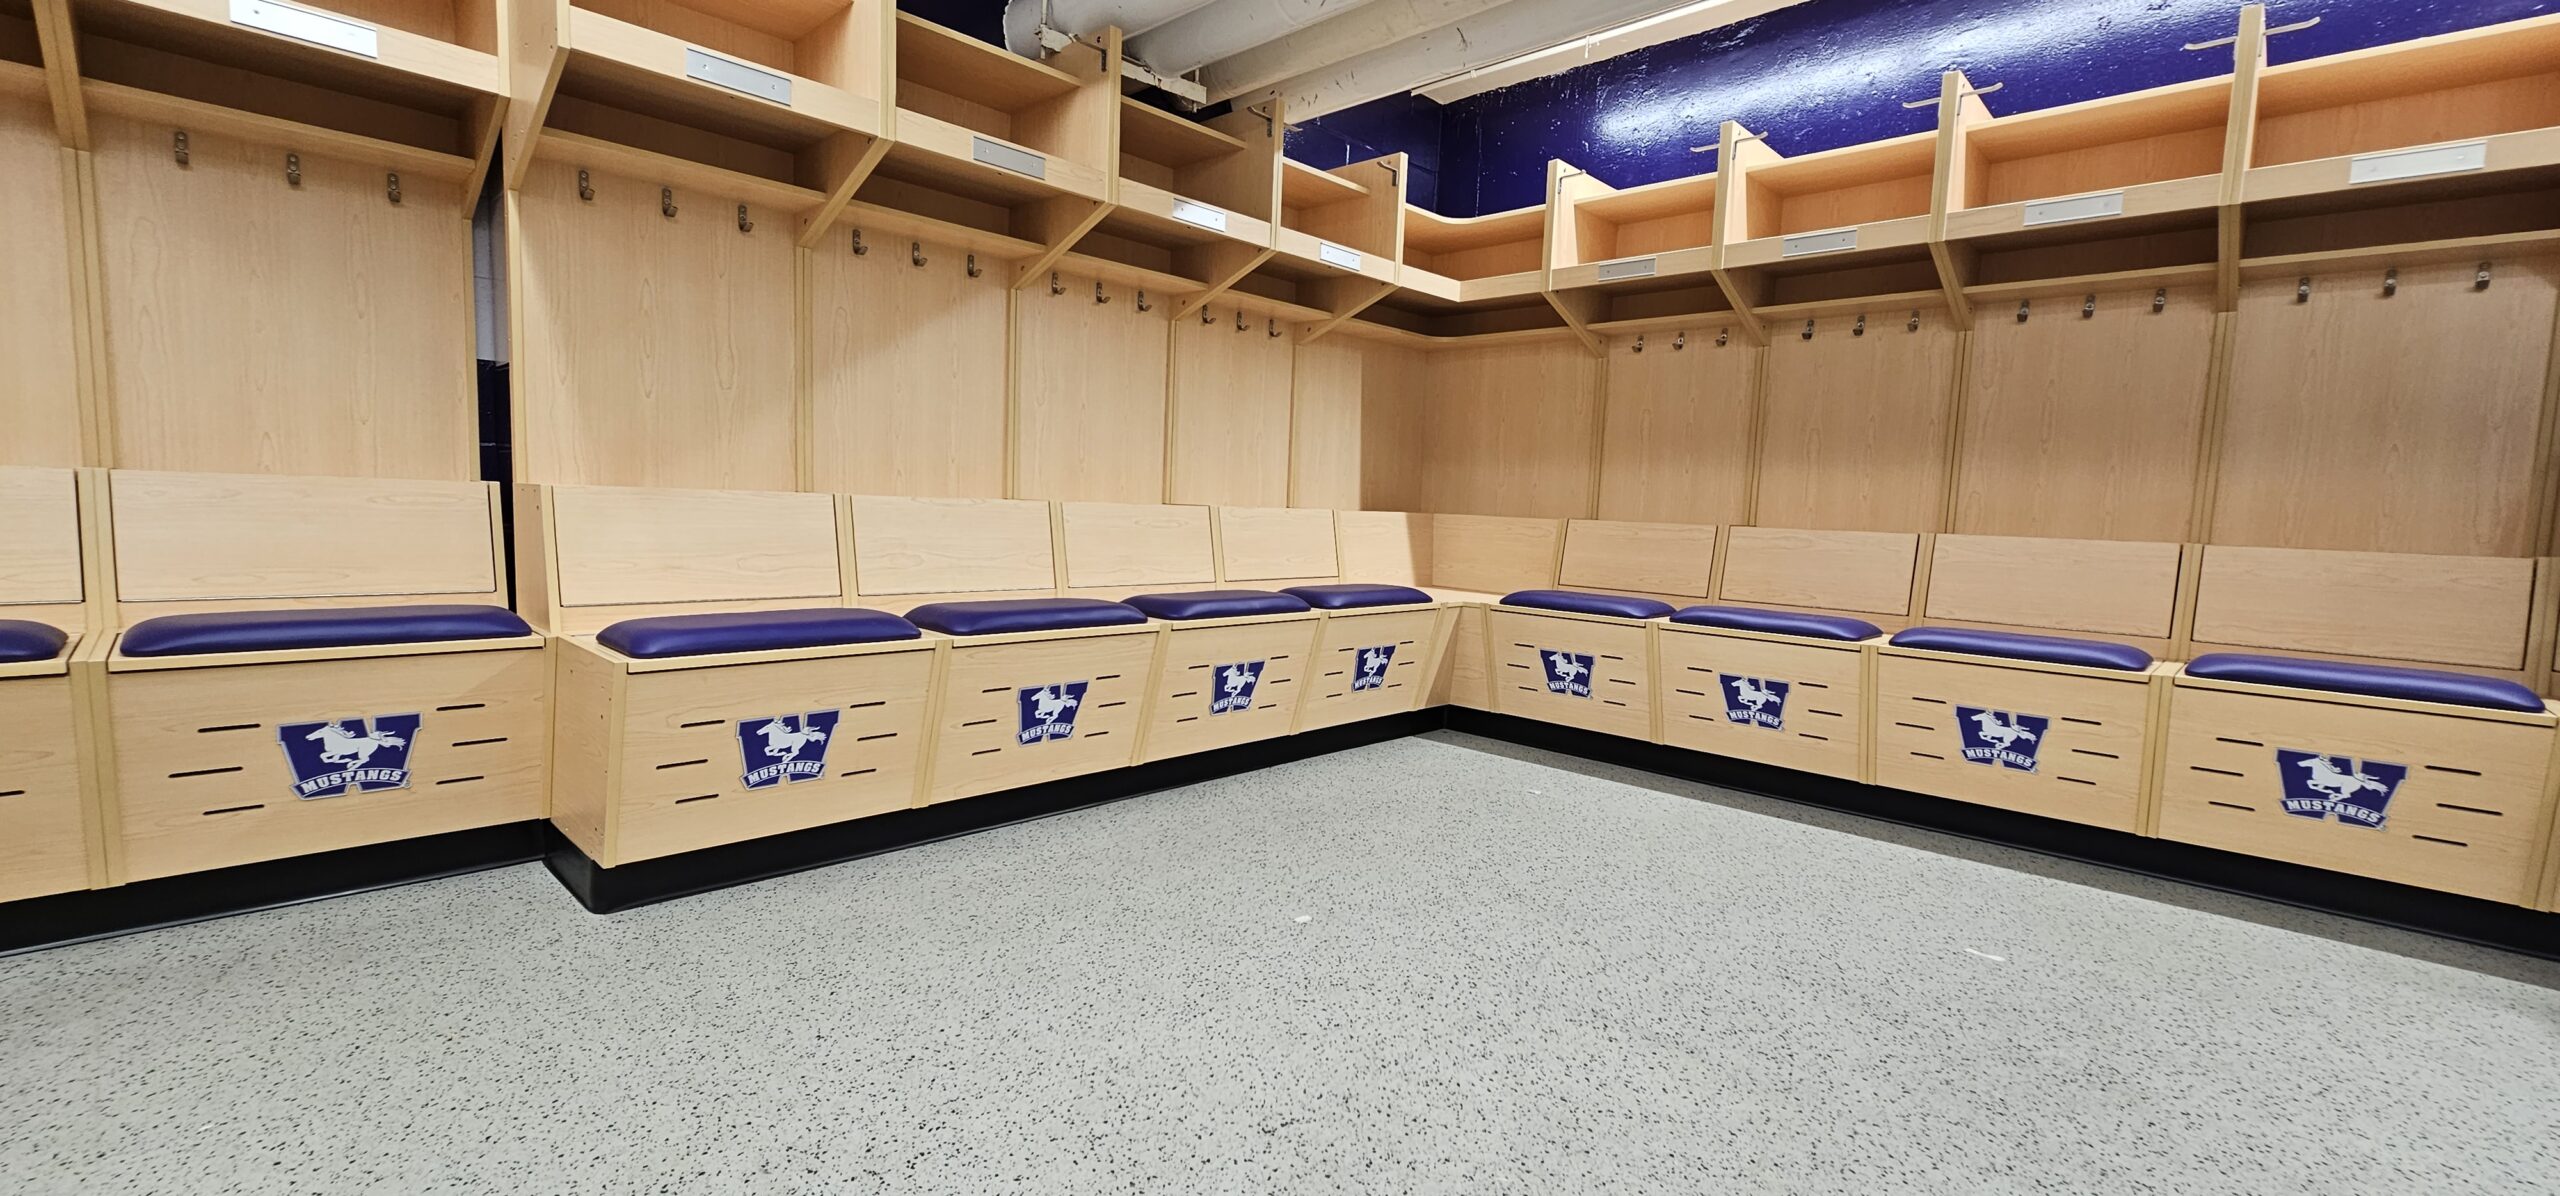 Photo of custom hockey locker room seating. The wood is maple, and the seats are padded with purple cushions and display the Mustangs logo.